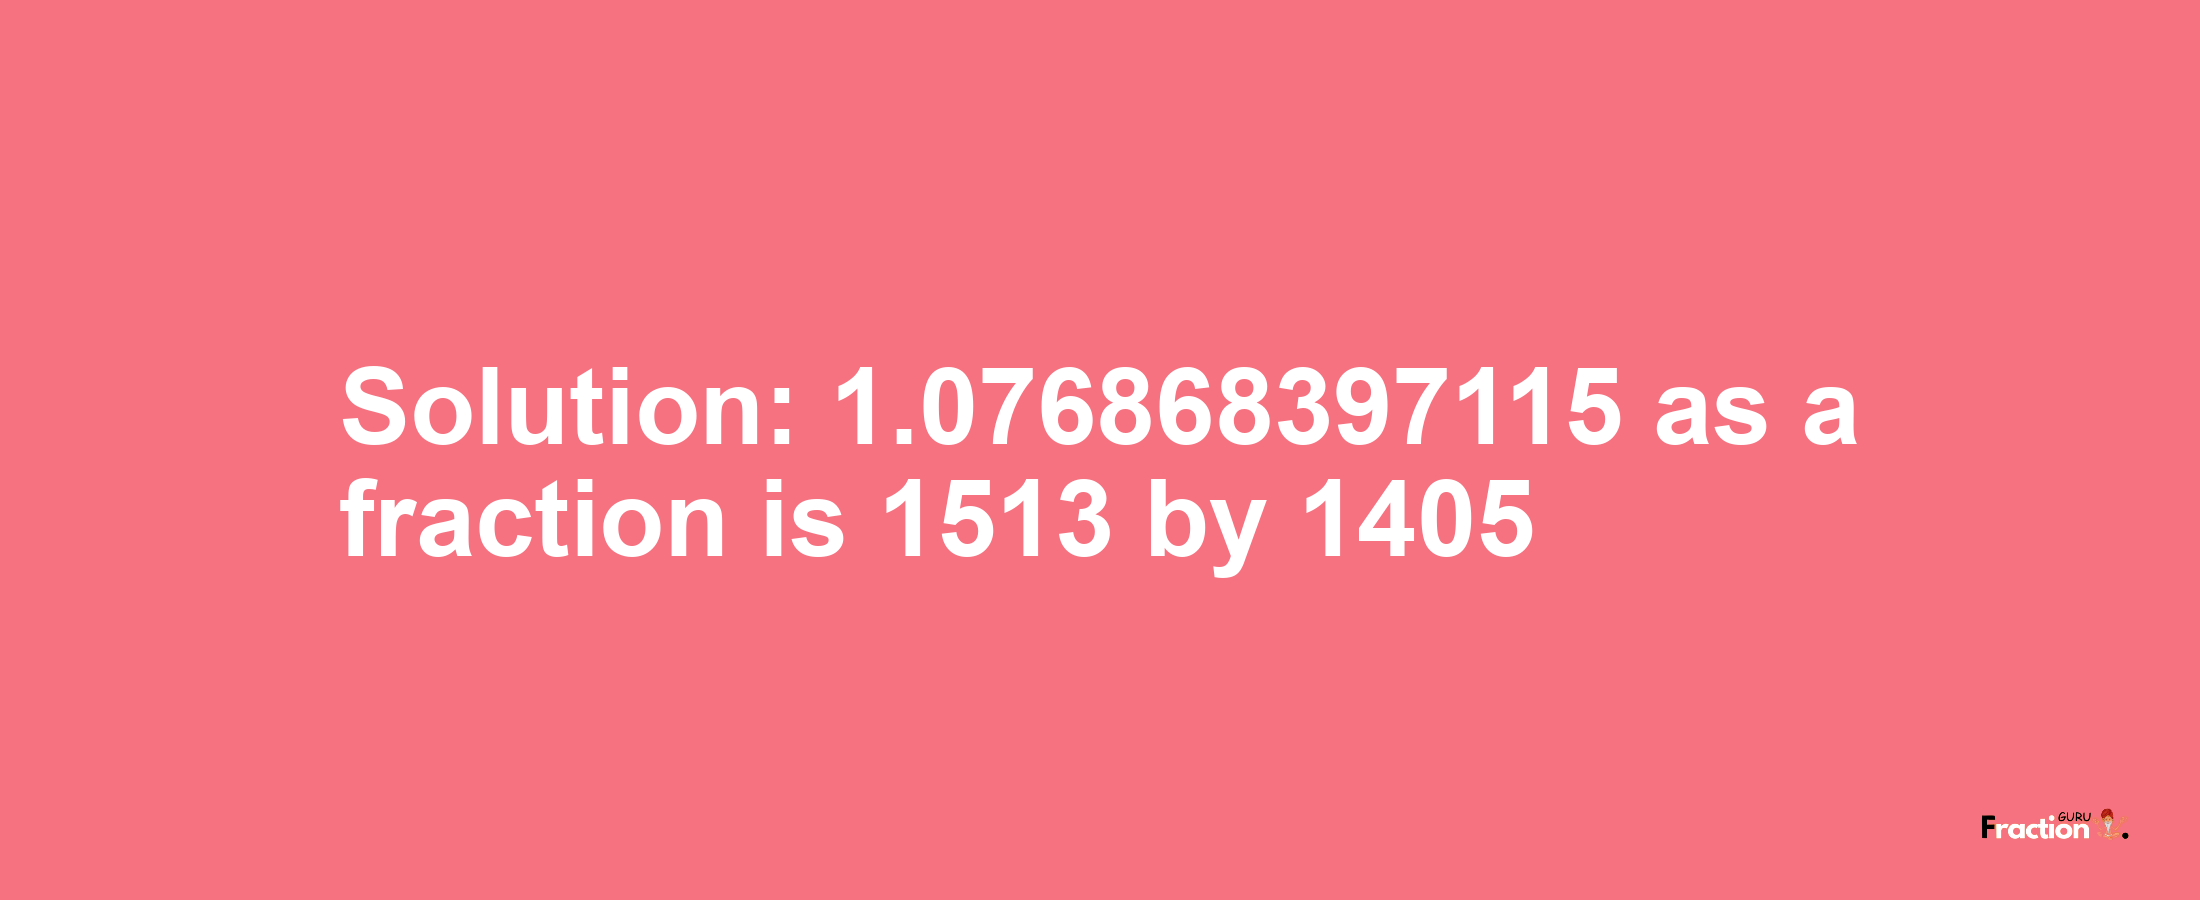 Solution:1.076868397115 as a fraction is 1513/1405